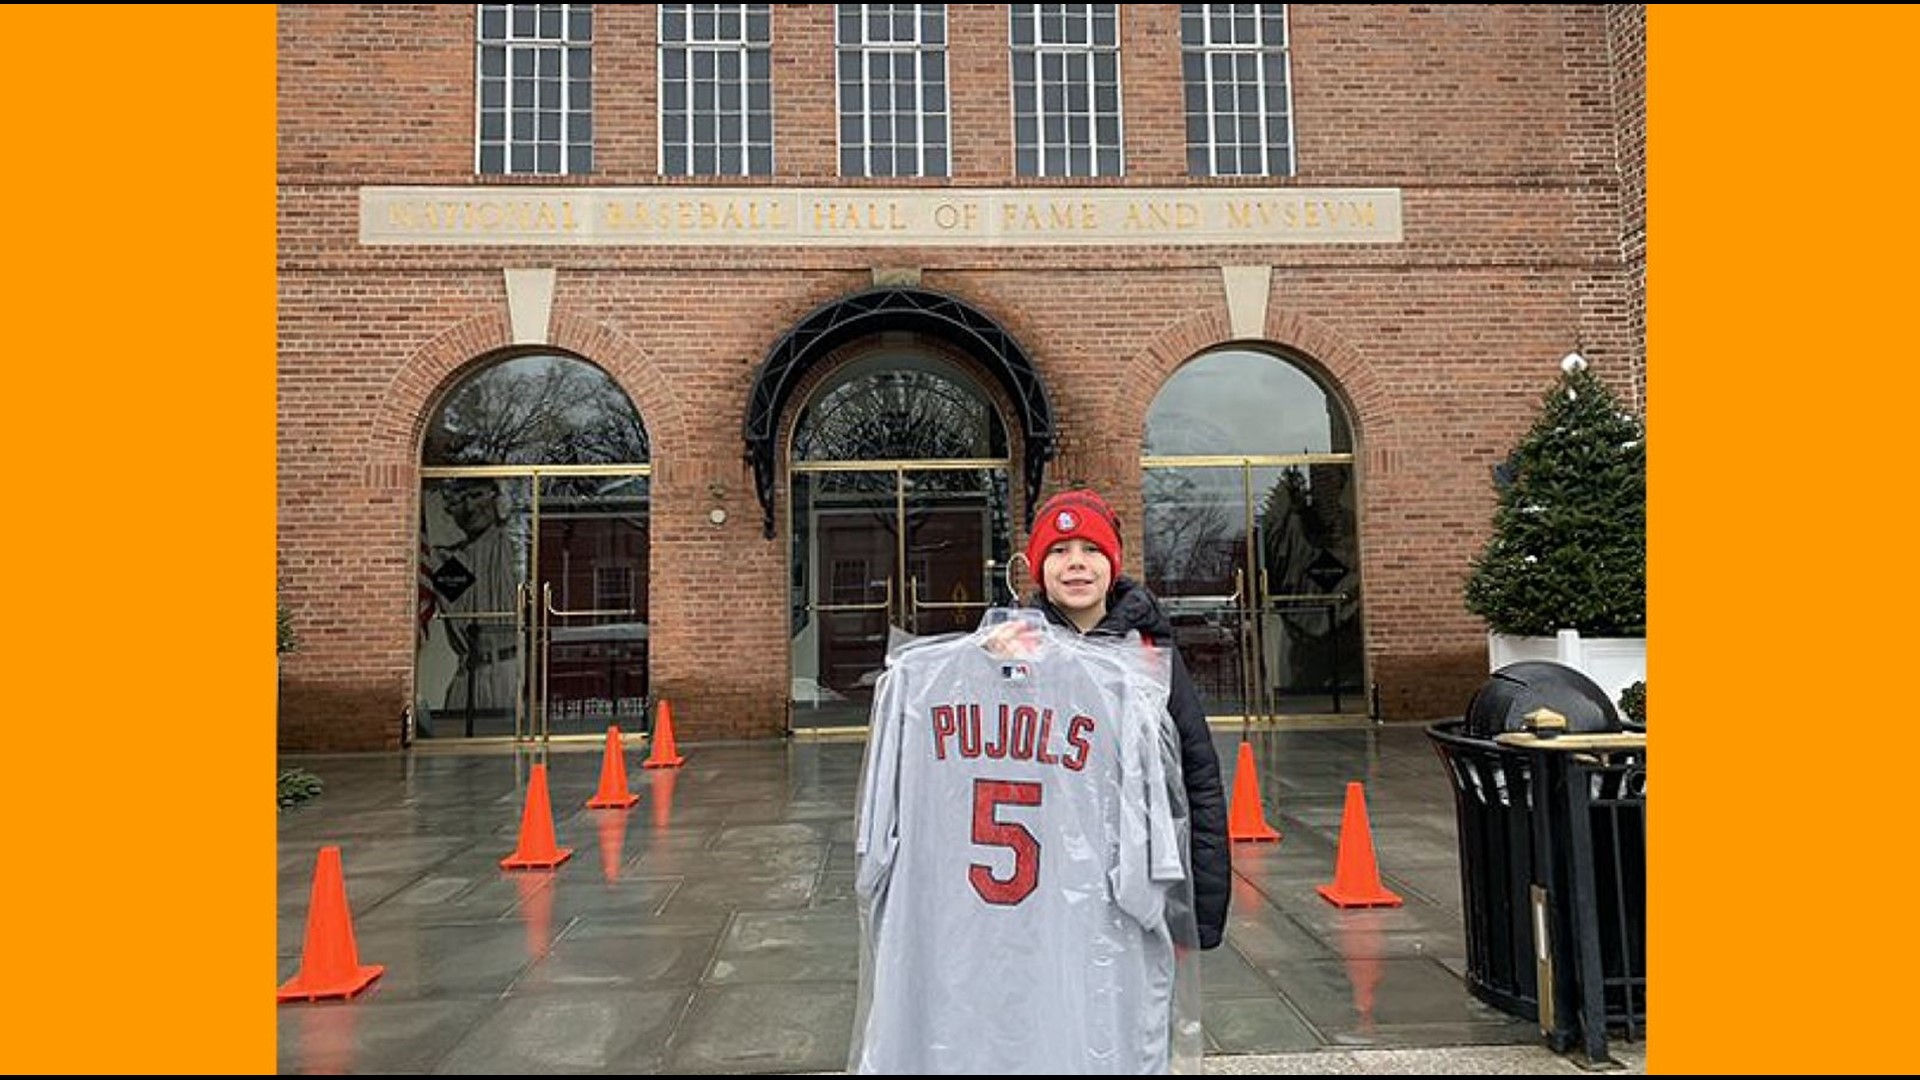 Young fan who got Pujols' jersey, loaned to hall of fame throws